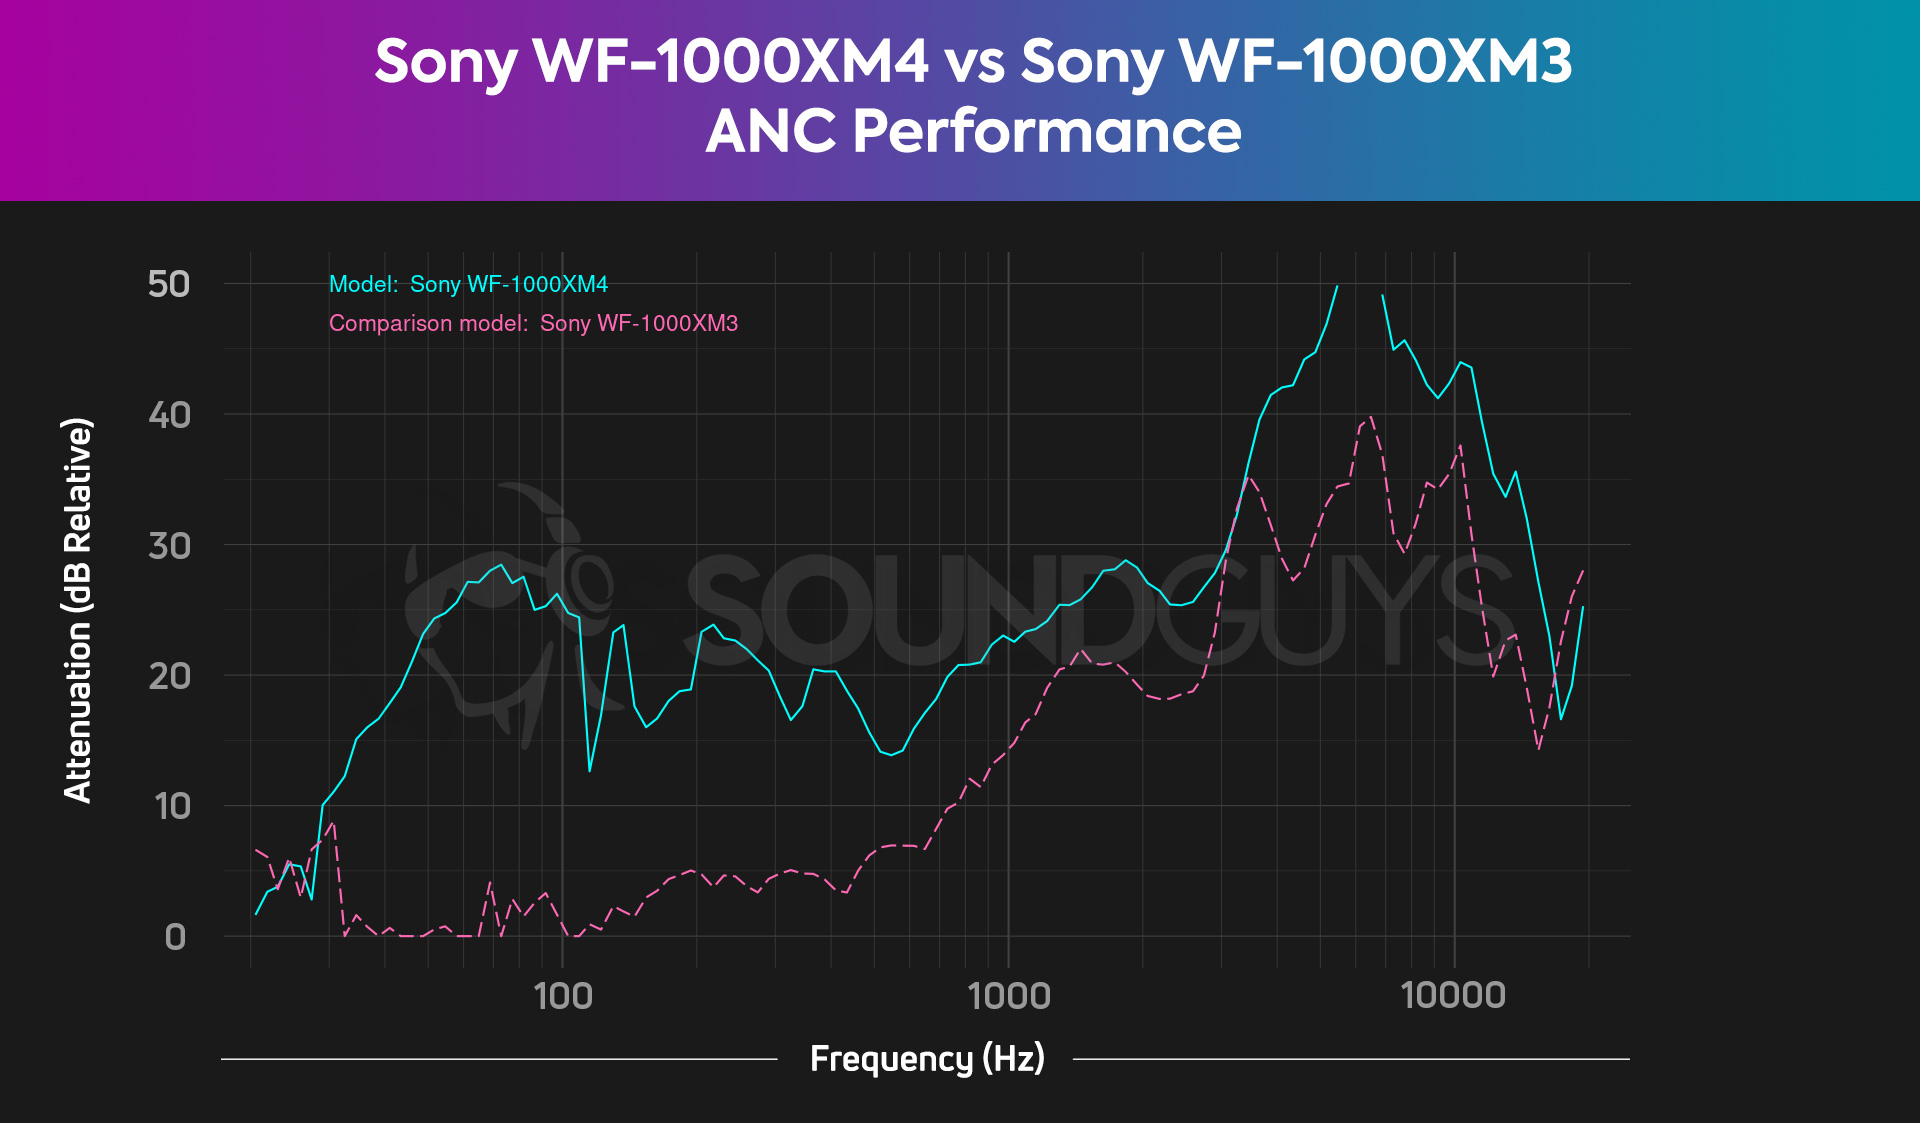 A chart compares the Sony WF-1000XM4 and WF-1000XM3 noise cancelling performance, revealing the WF-1000XM4 to be much more effective across the board.